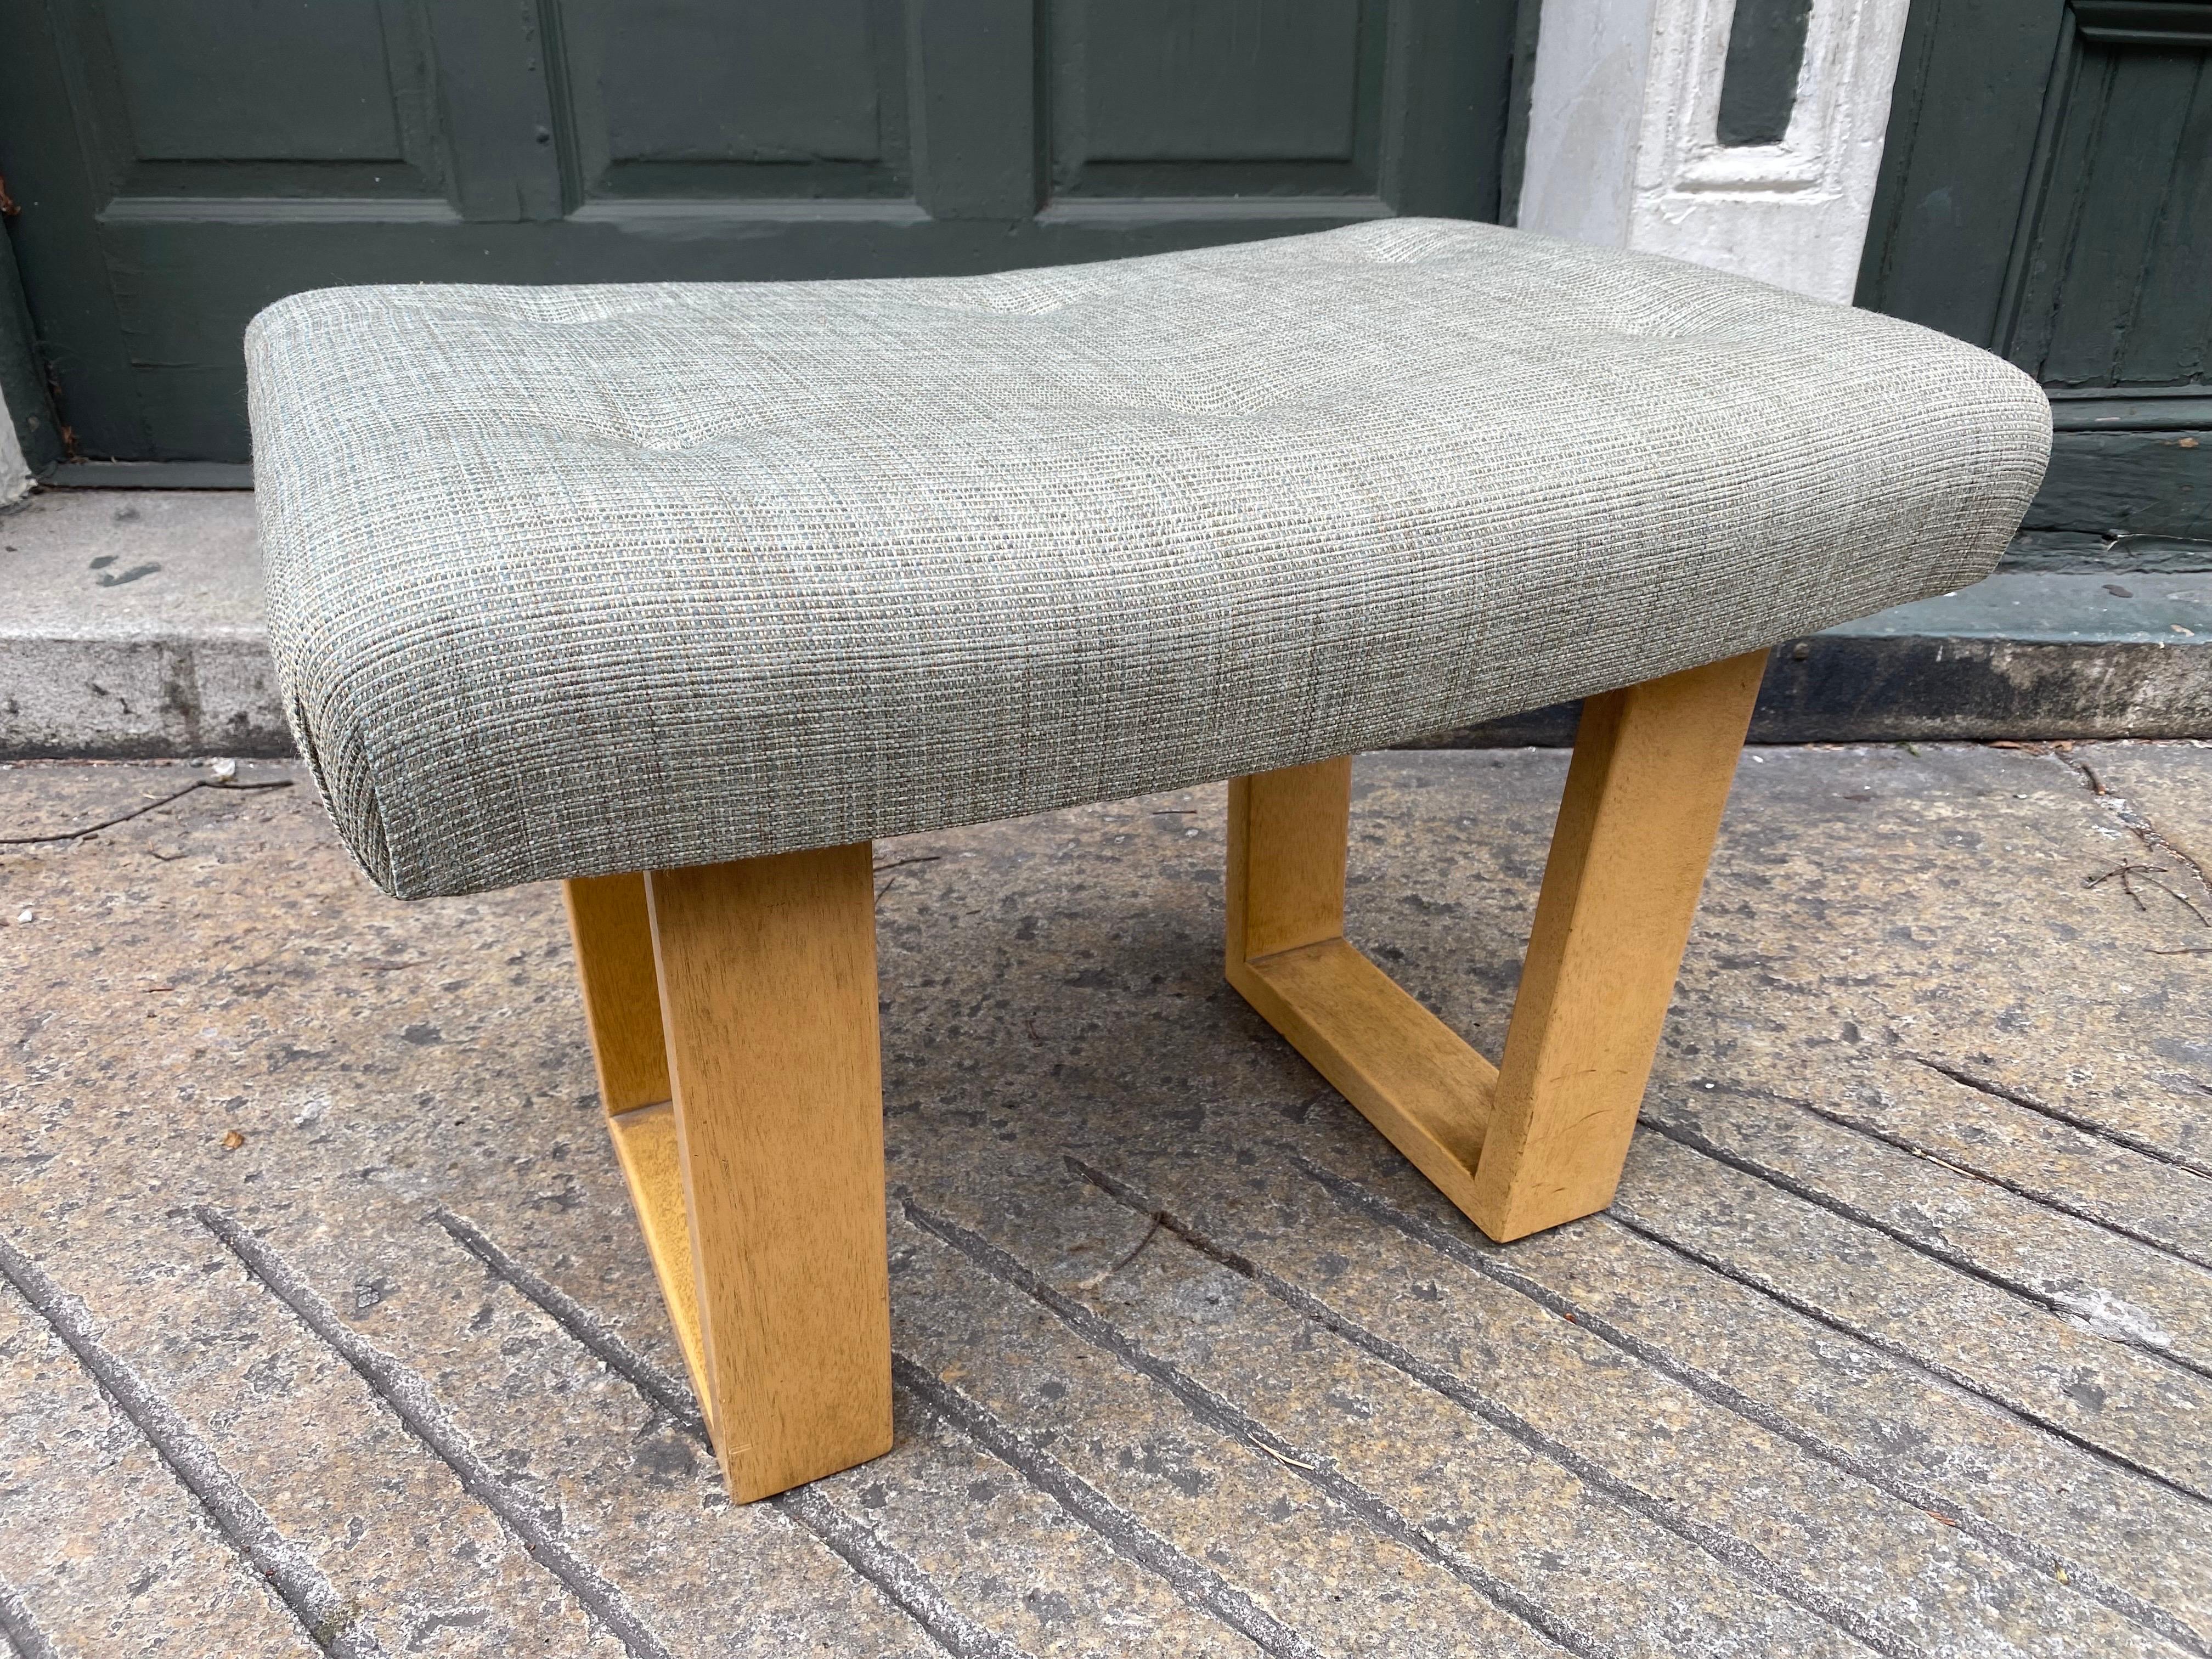 Small scale bench or ottoman with bleached mahogany Sled like legs. Edward Wormley style design. Very solid and newly reupholstered!